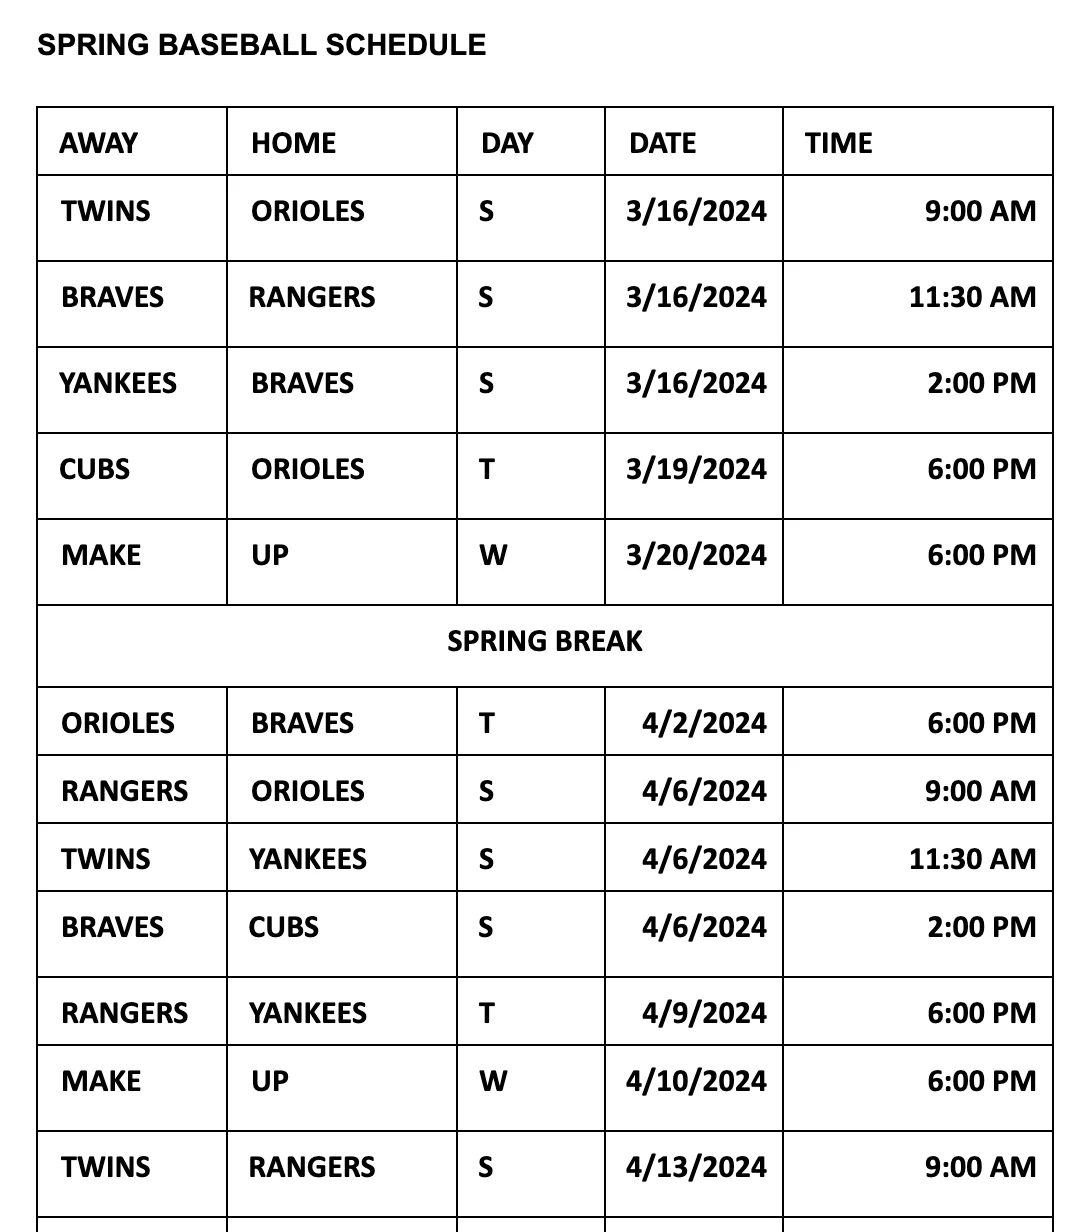 a baseball organization calendar with game times and locations for each team